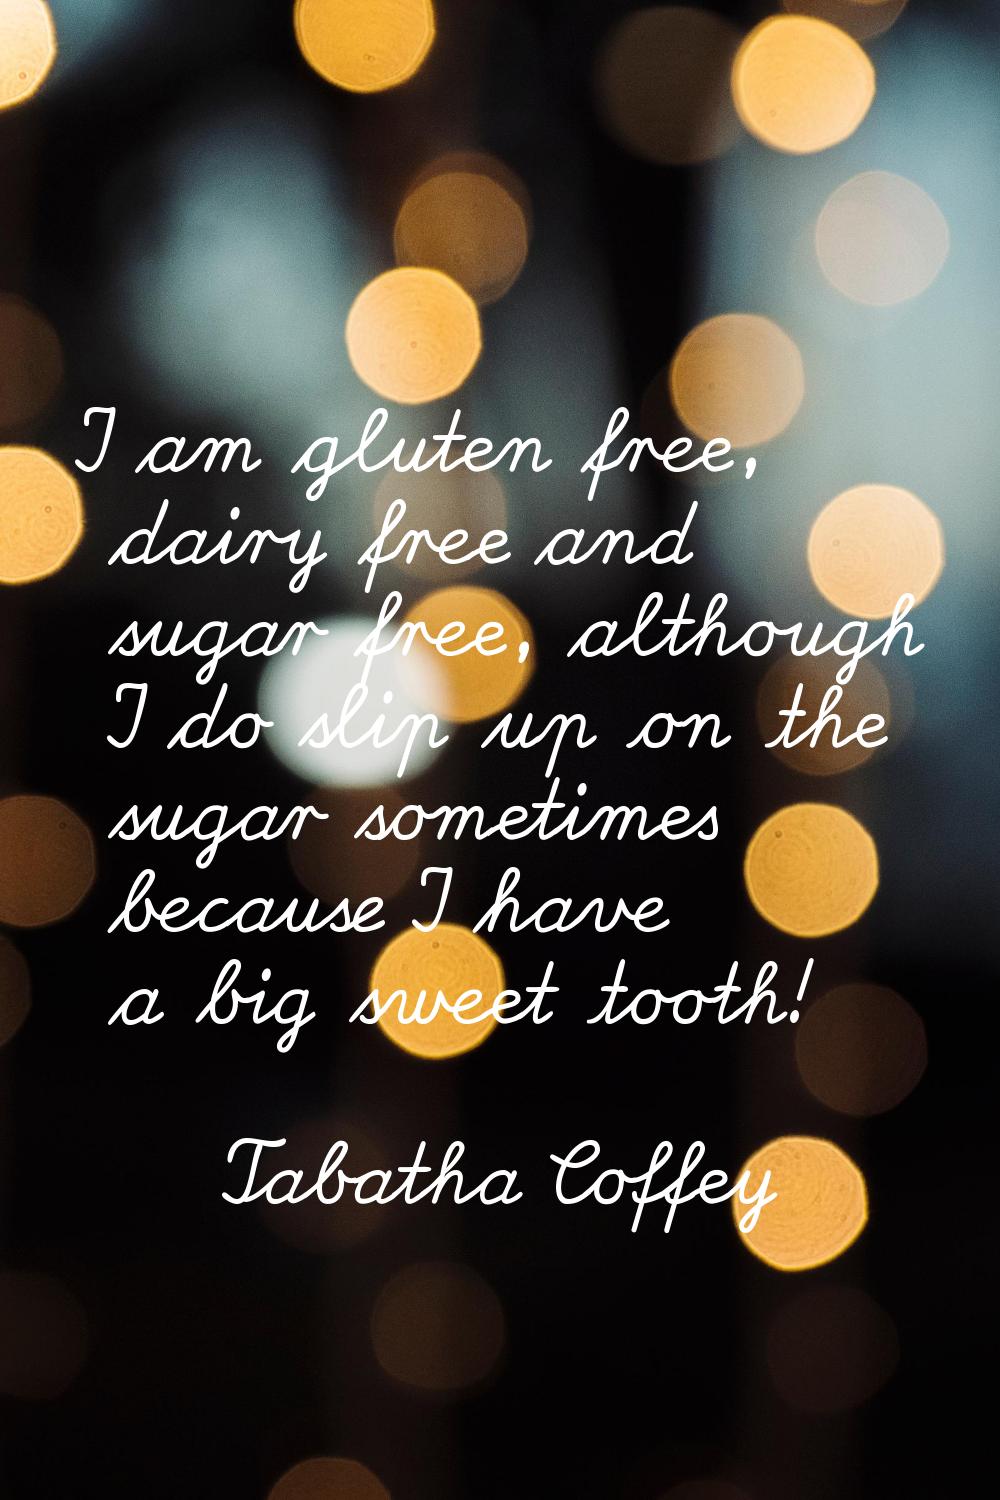 I am gluten free, dairy free and sugar free, although I do slip up on the sugar sometimes because I